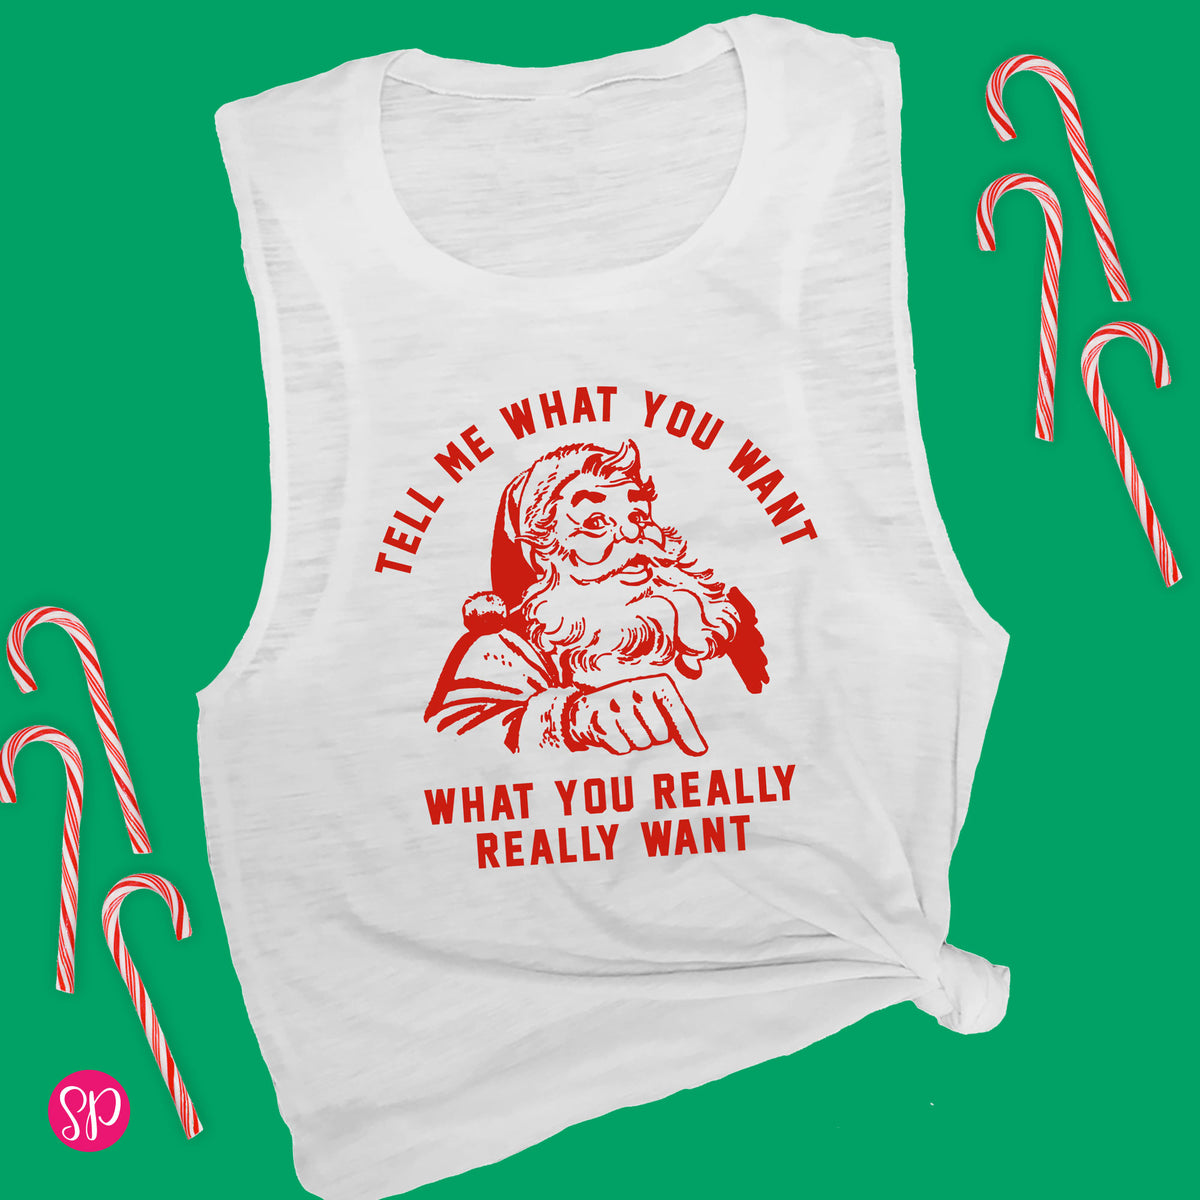 Tell Me What You Want What You Really Really Want Muscle Tee Santa Claus 90s Rap Music Song Pun Shirt